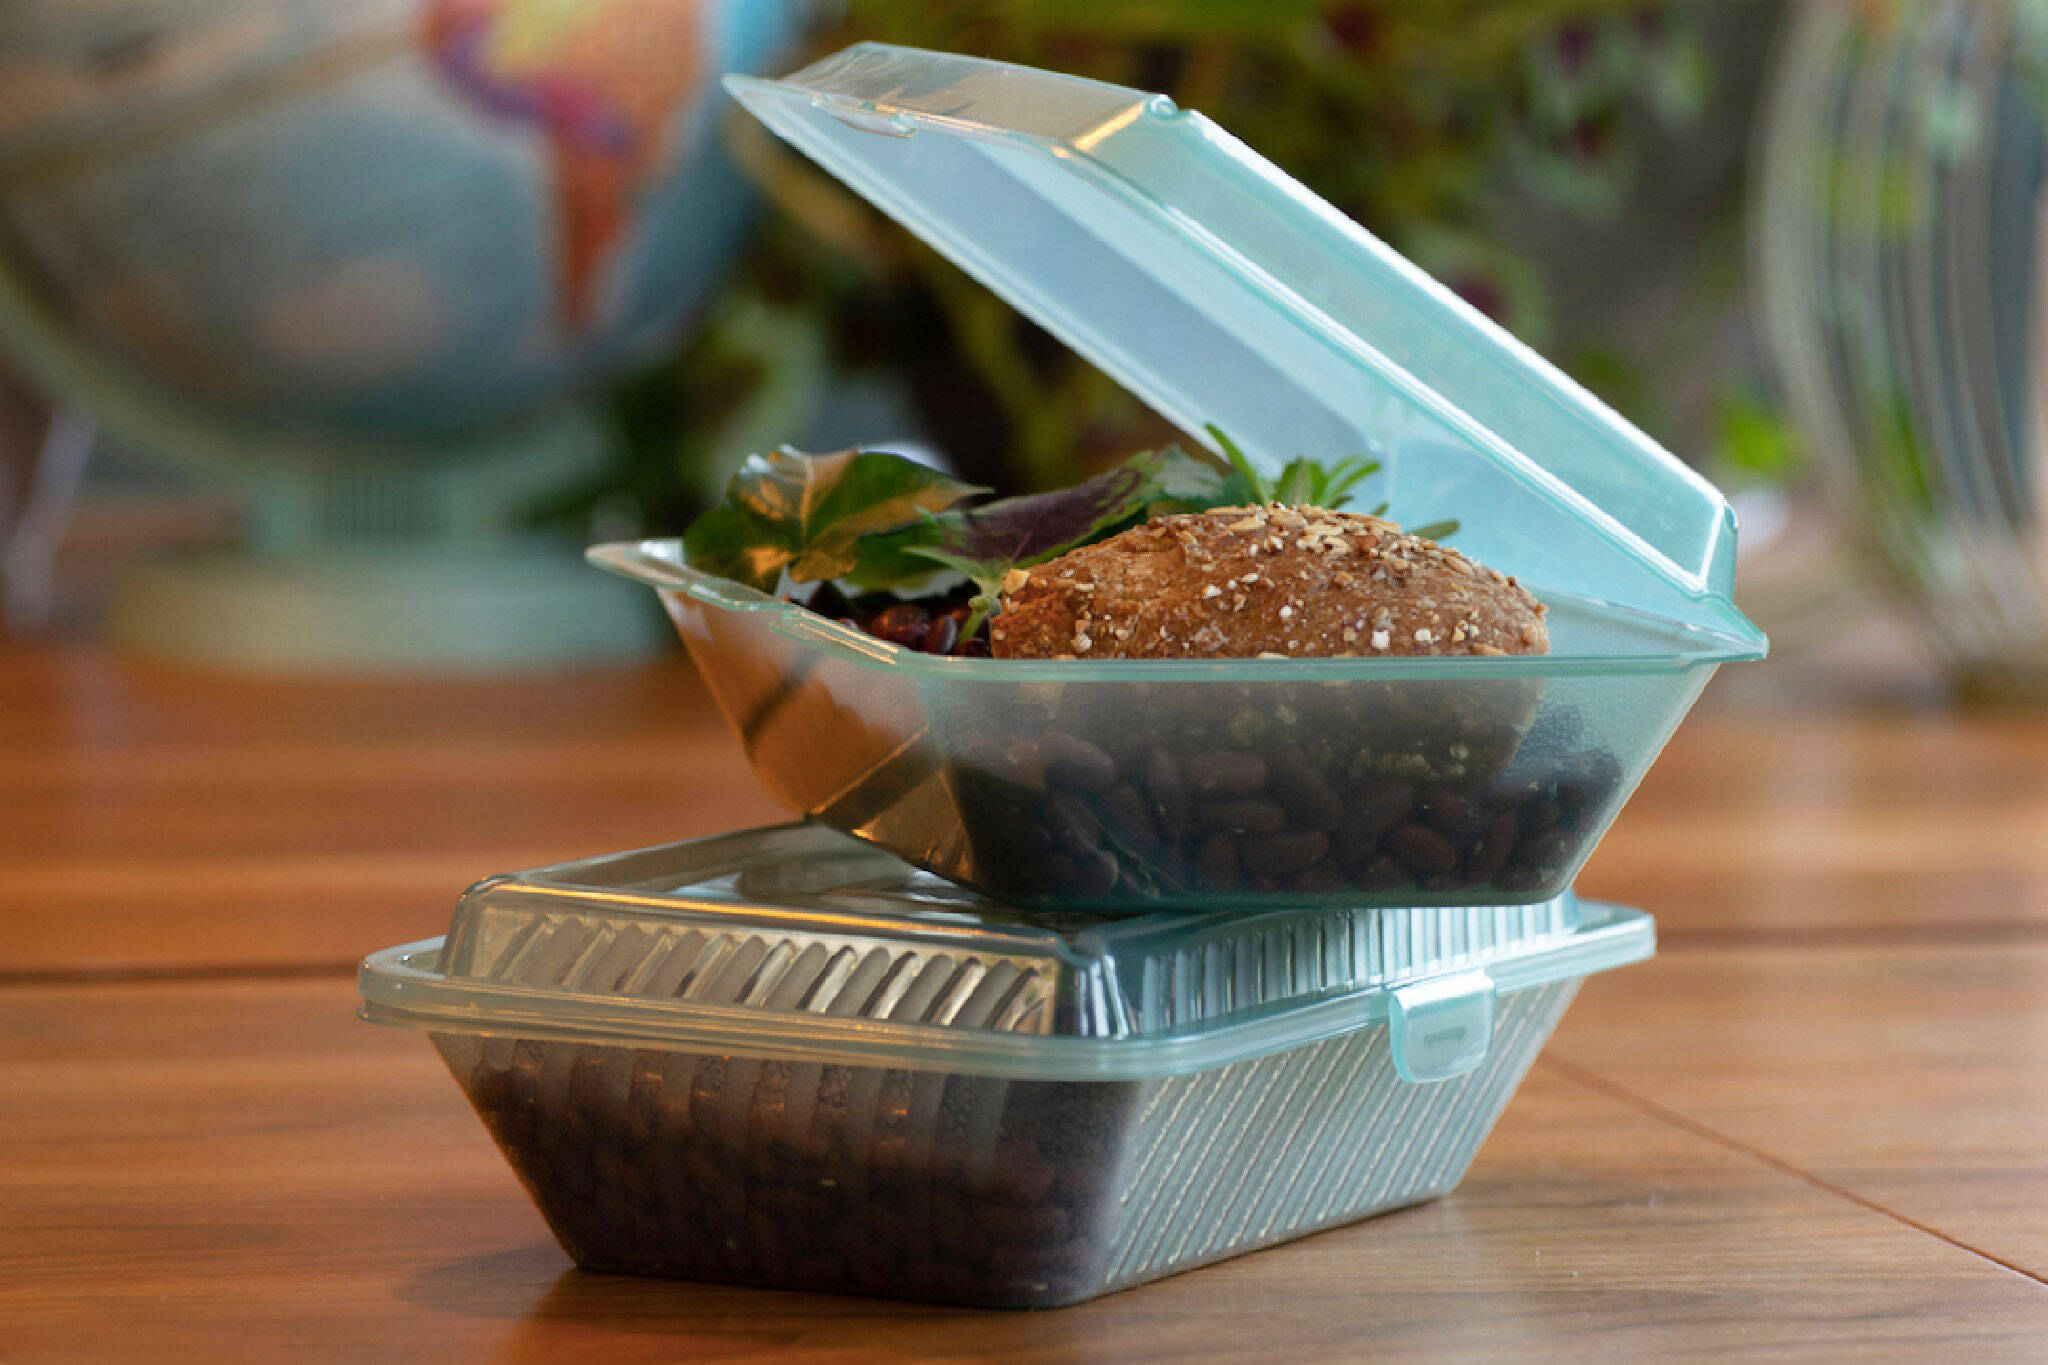 Toronto is getting its first city-wide reusable restaurant takeout container  program